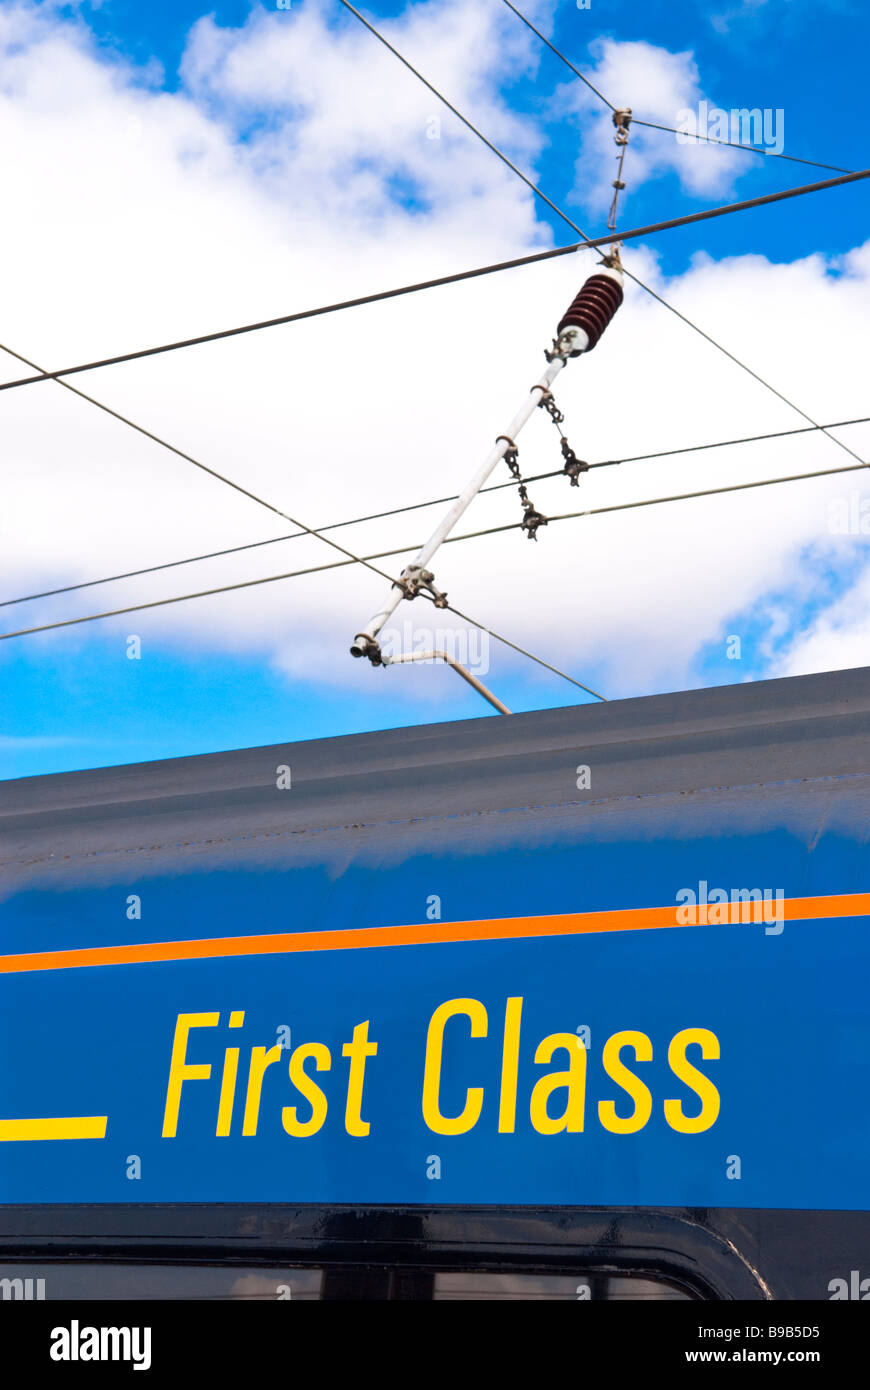 A first class train carriage with electric wires overhead Stock Photo